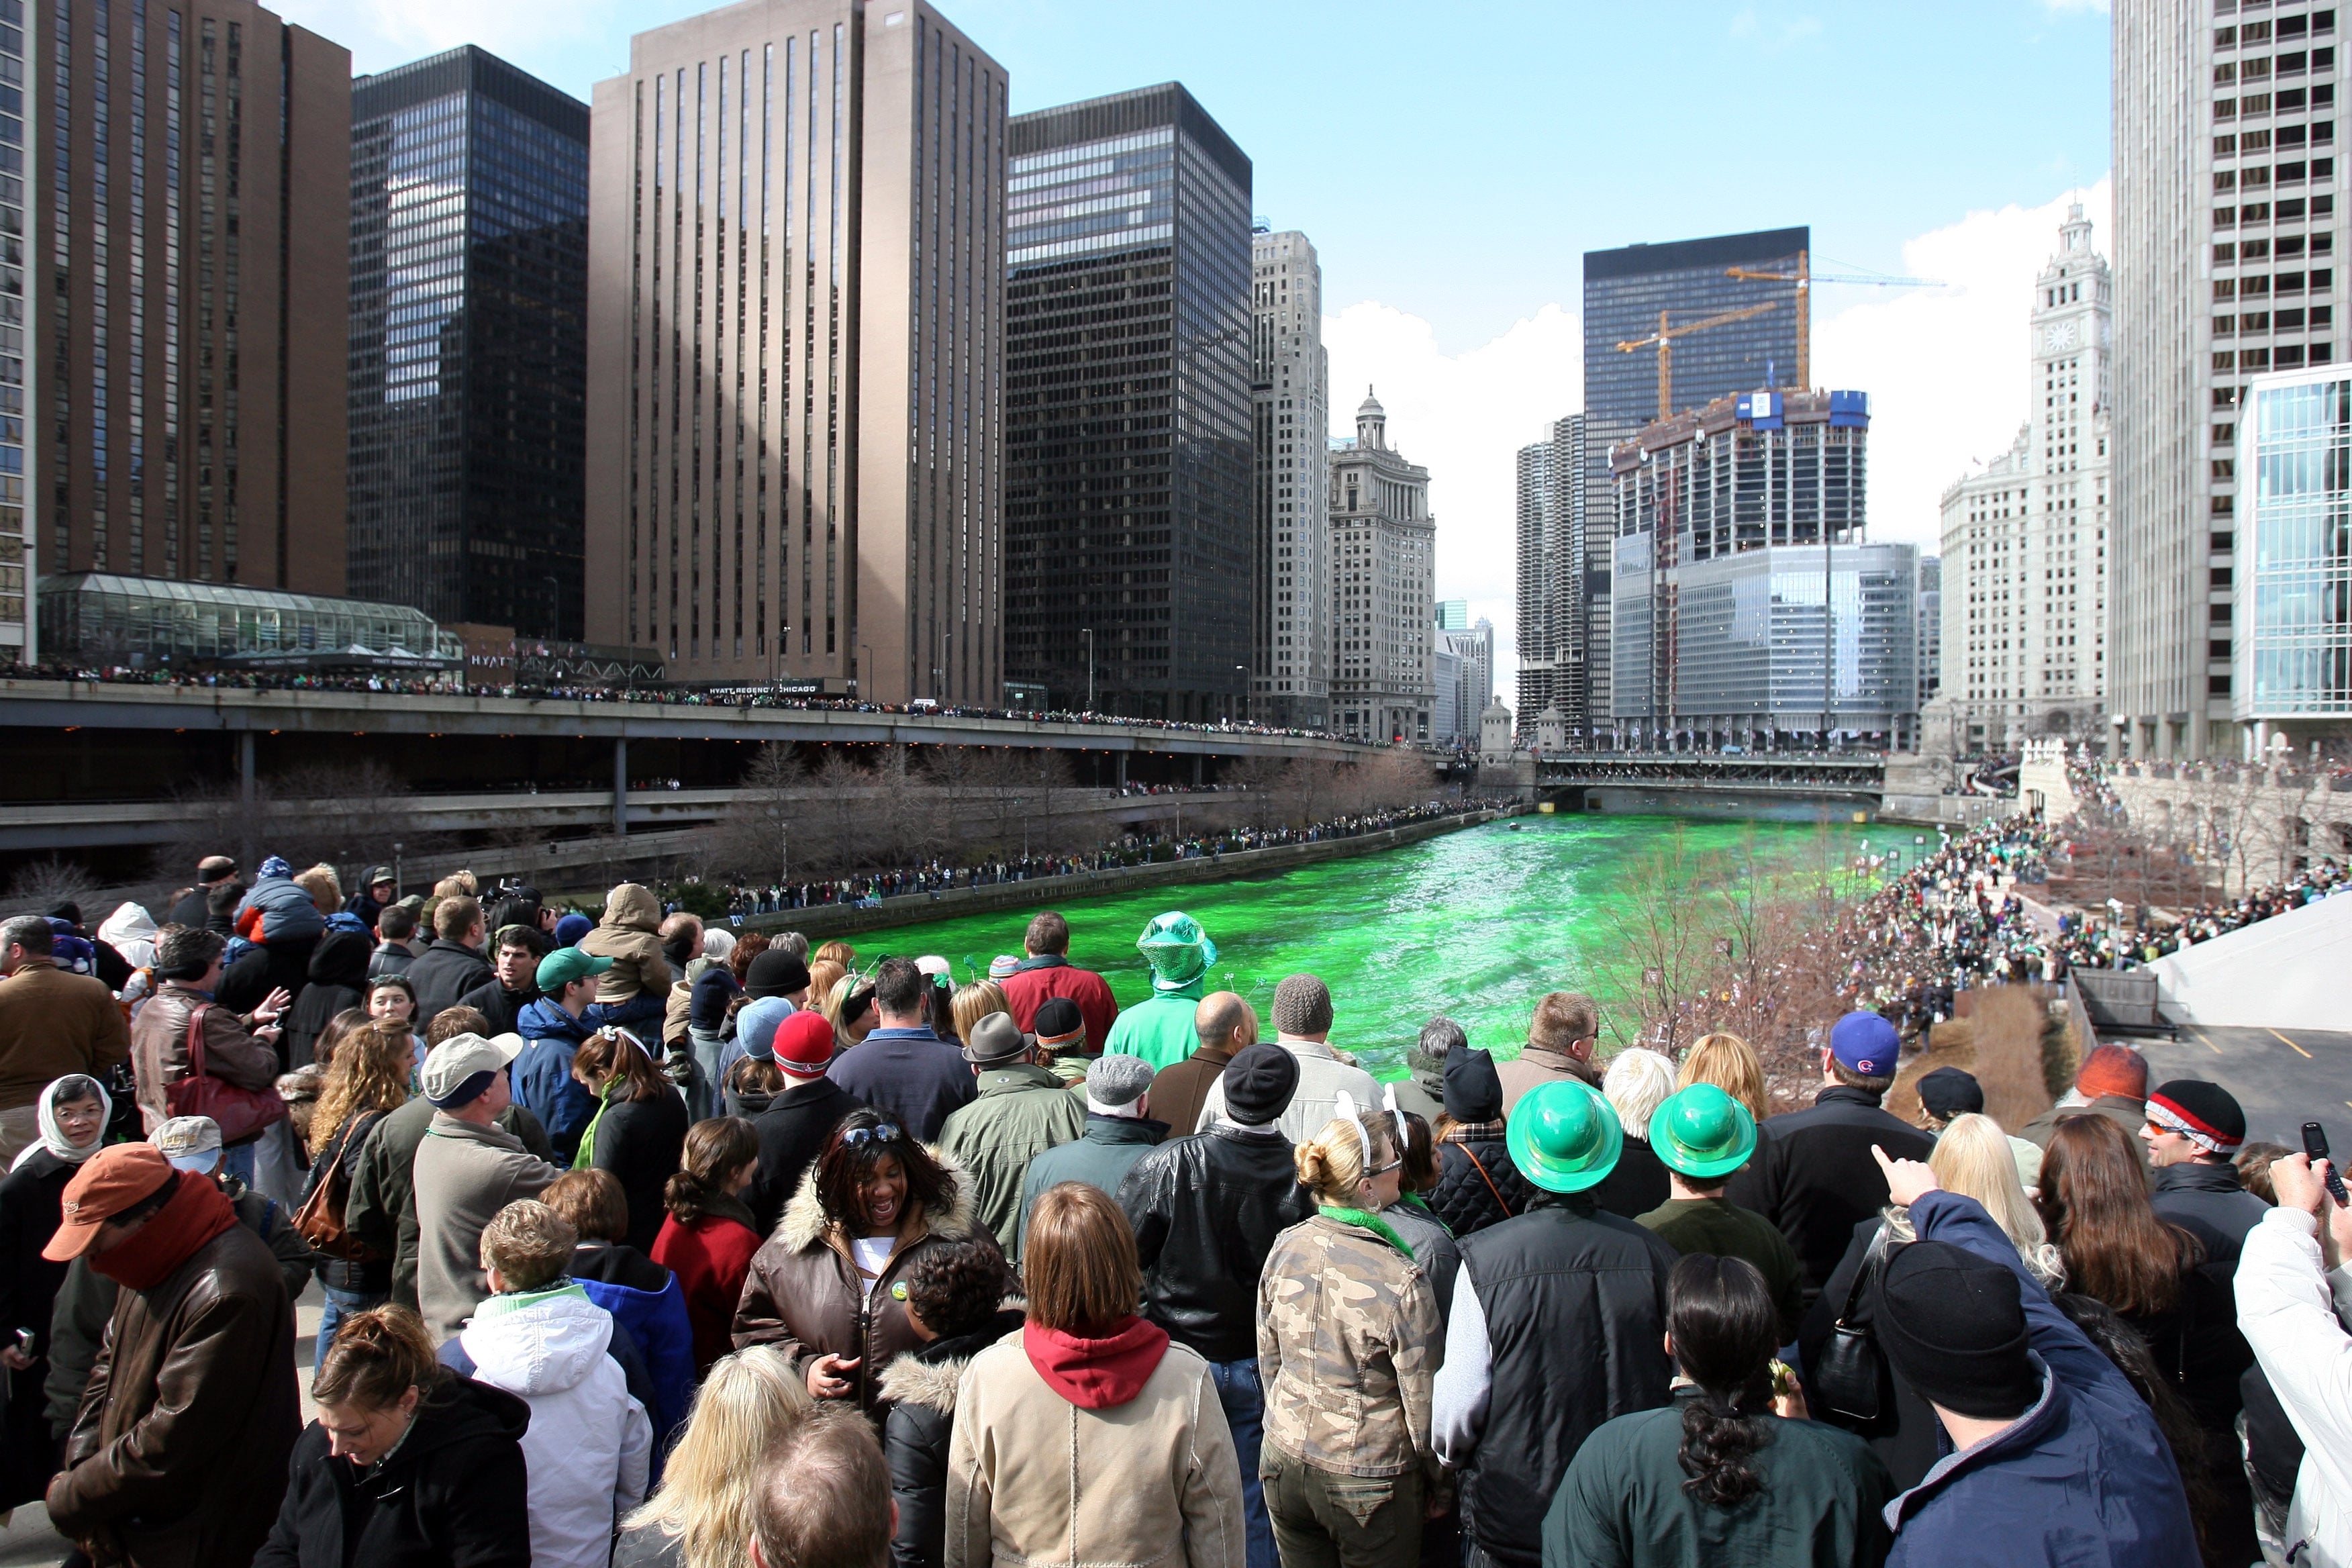 St. Patrick's Day in Chicago, Pictures